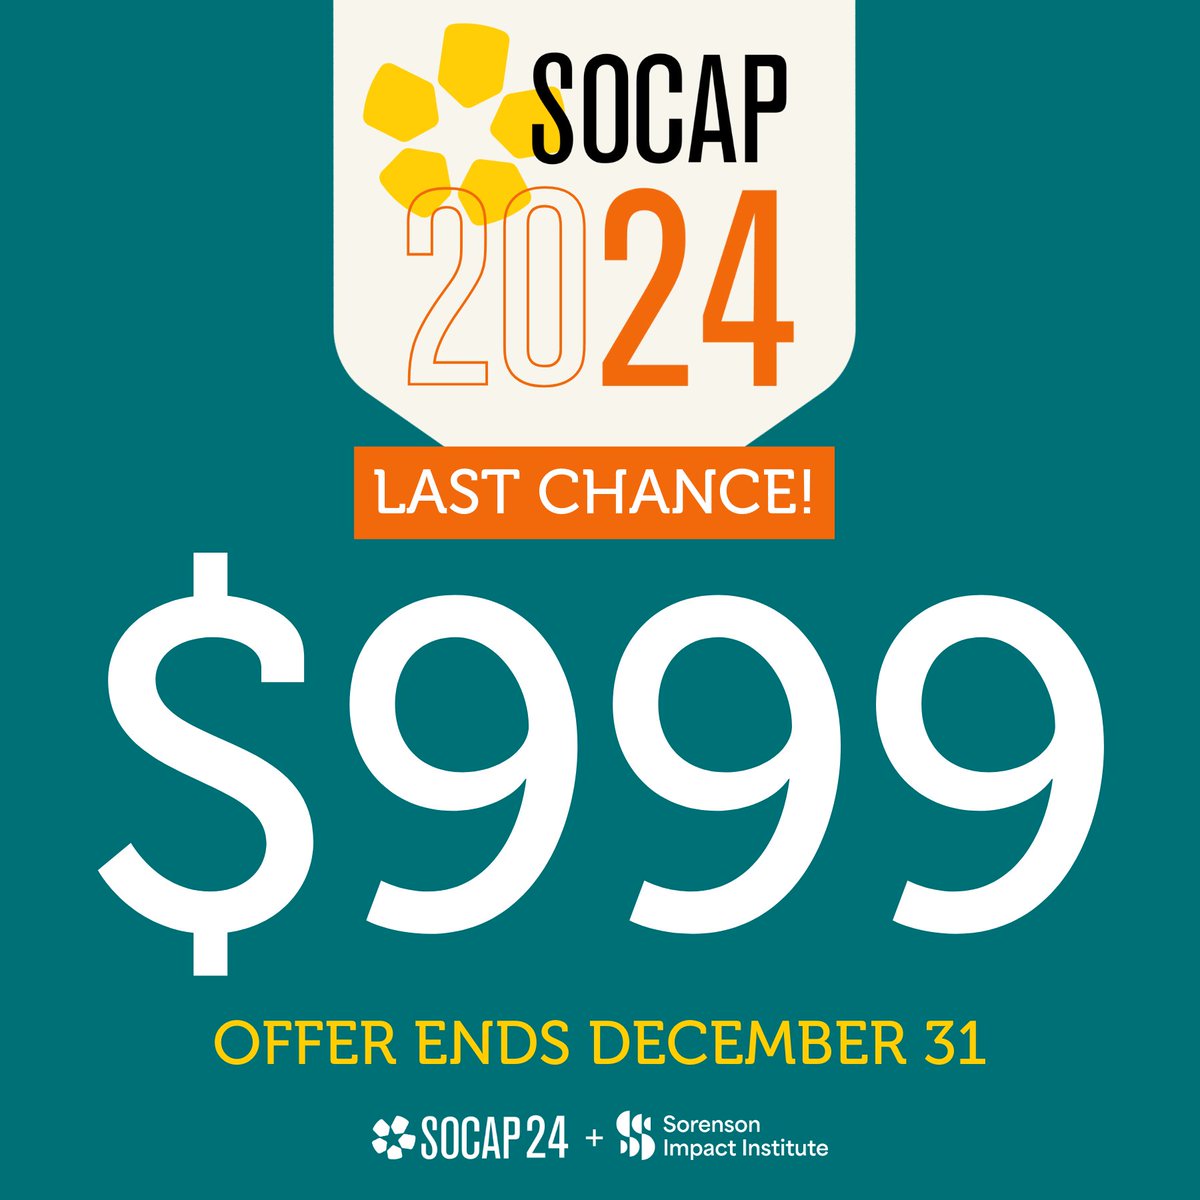 It's the final day of 2023 and the last chance to purchase SOCAP24 tickets for $999 — the lowest price you'll see before the event! Register by midnight PT to take advantage of this limited-time offer. bit.ly/48rc9Vj